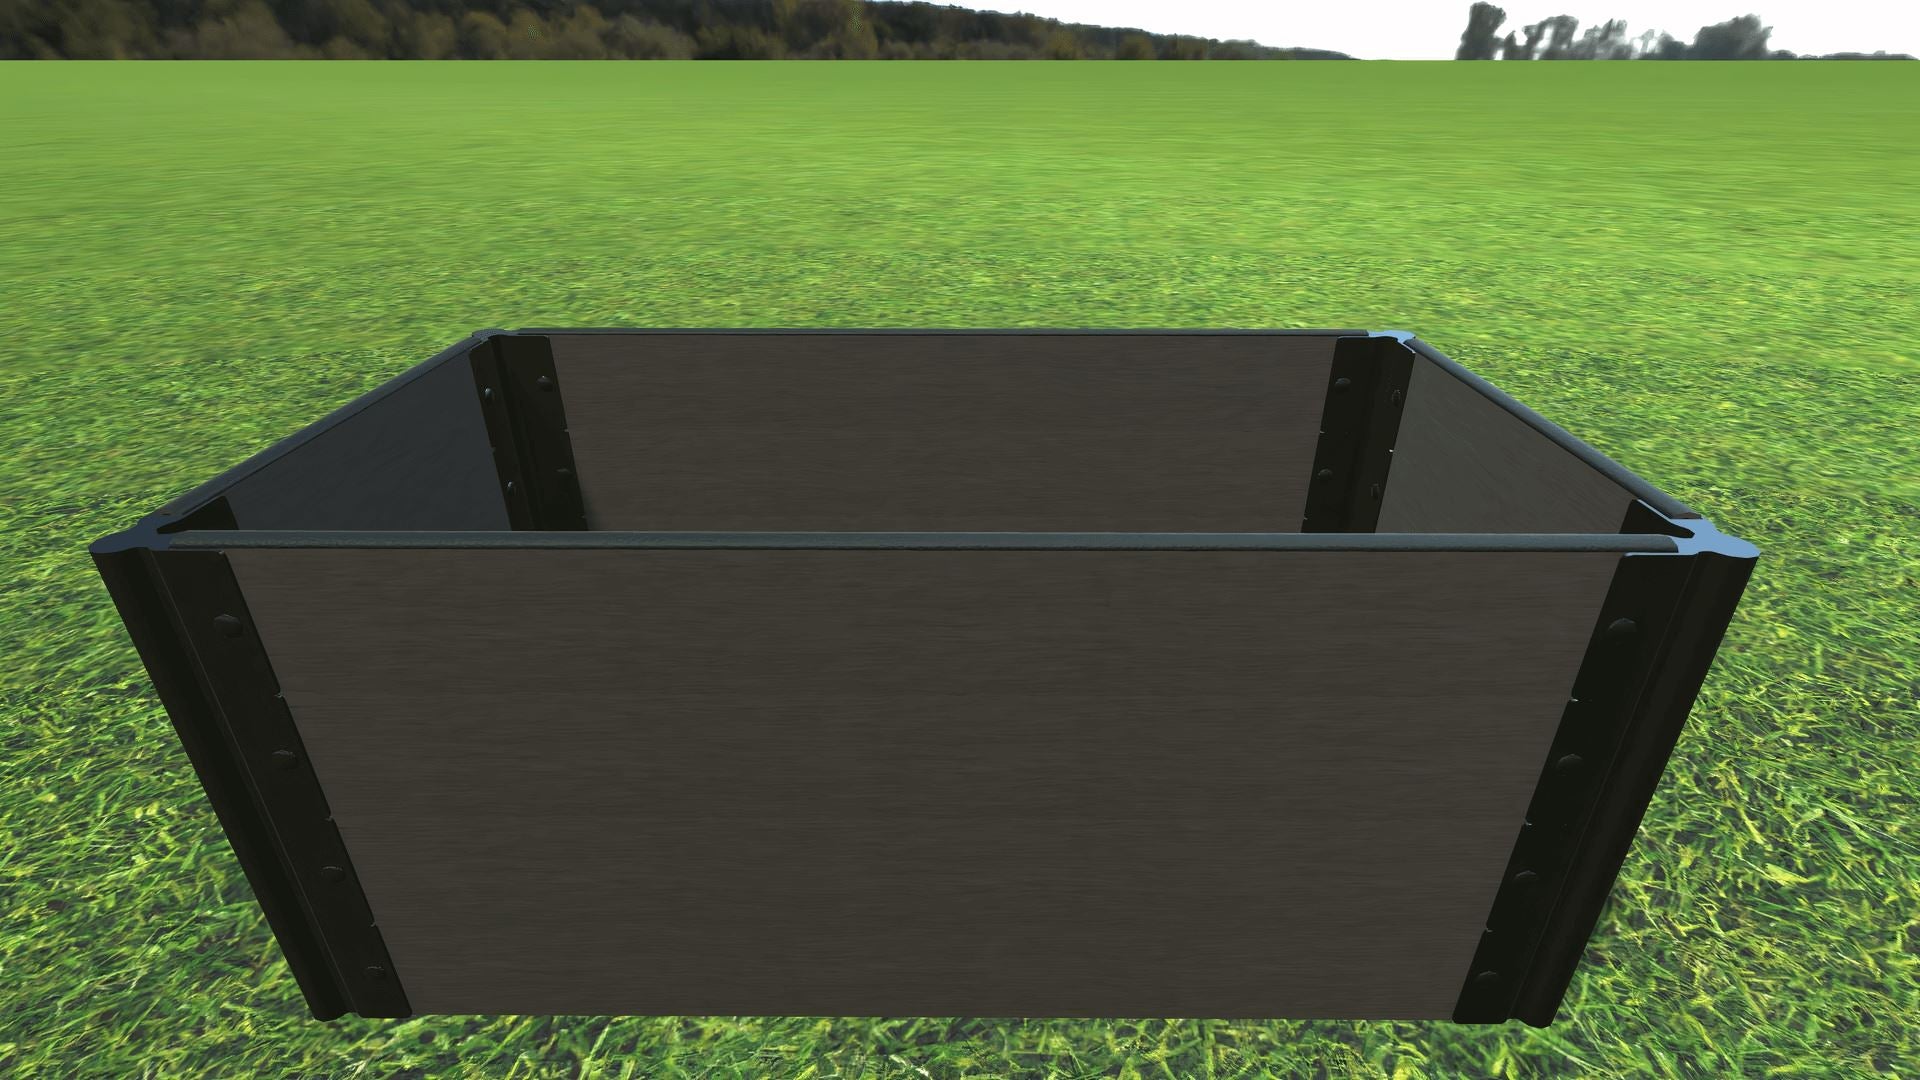 Tool-Free 2' x 4' Raised Garden Bed Raised Bed Planters Frame It All Weathered Wood 1'' 4 = 22"